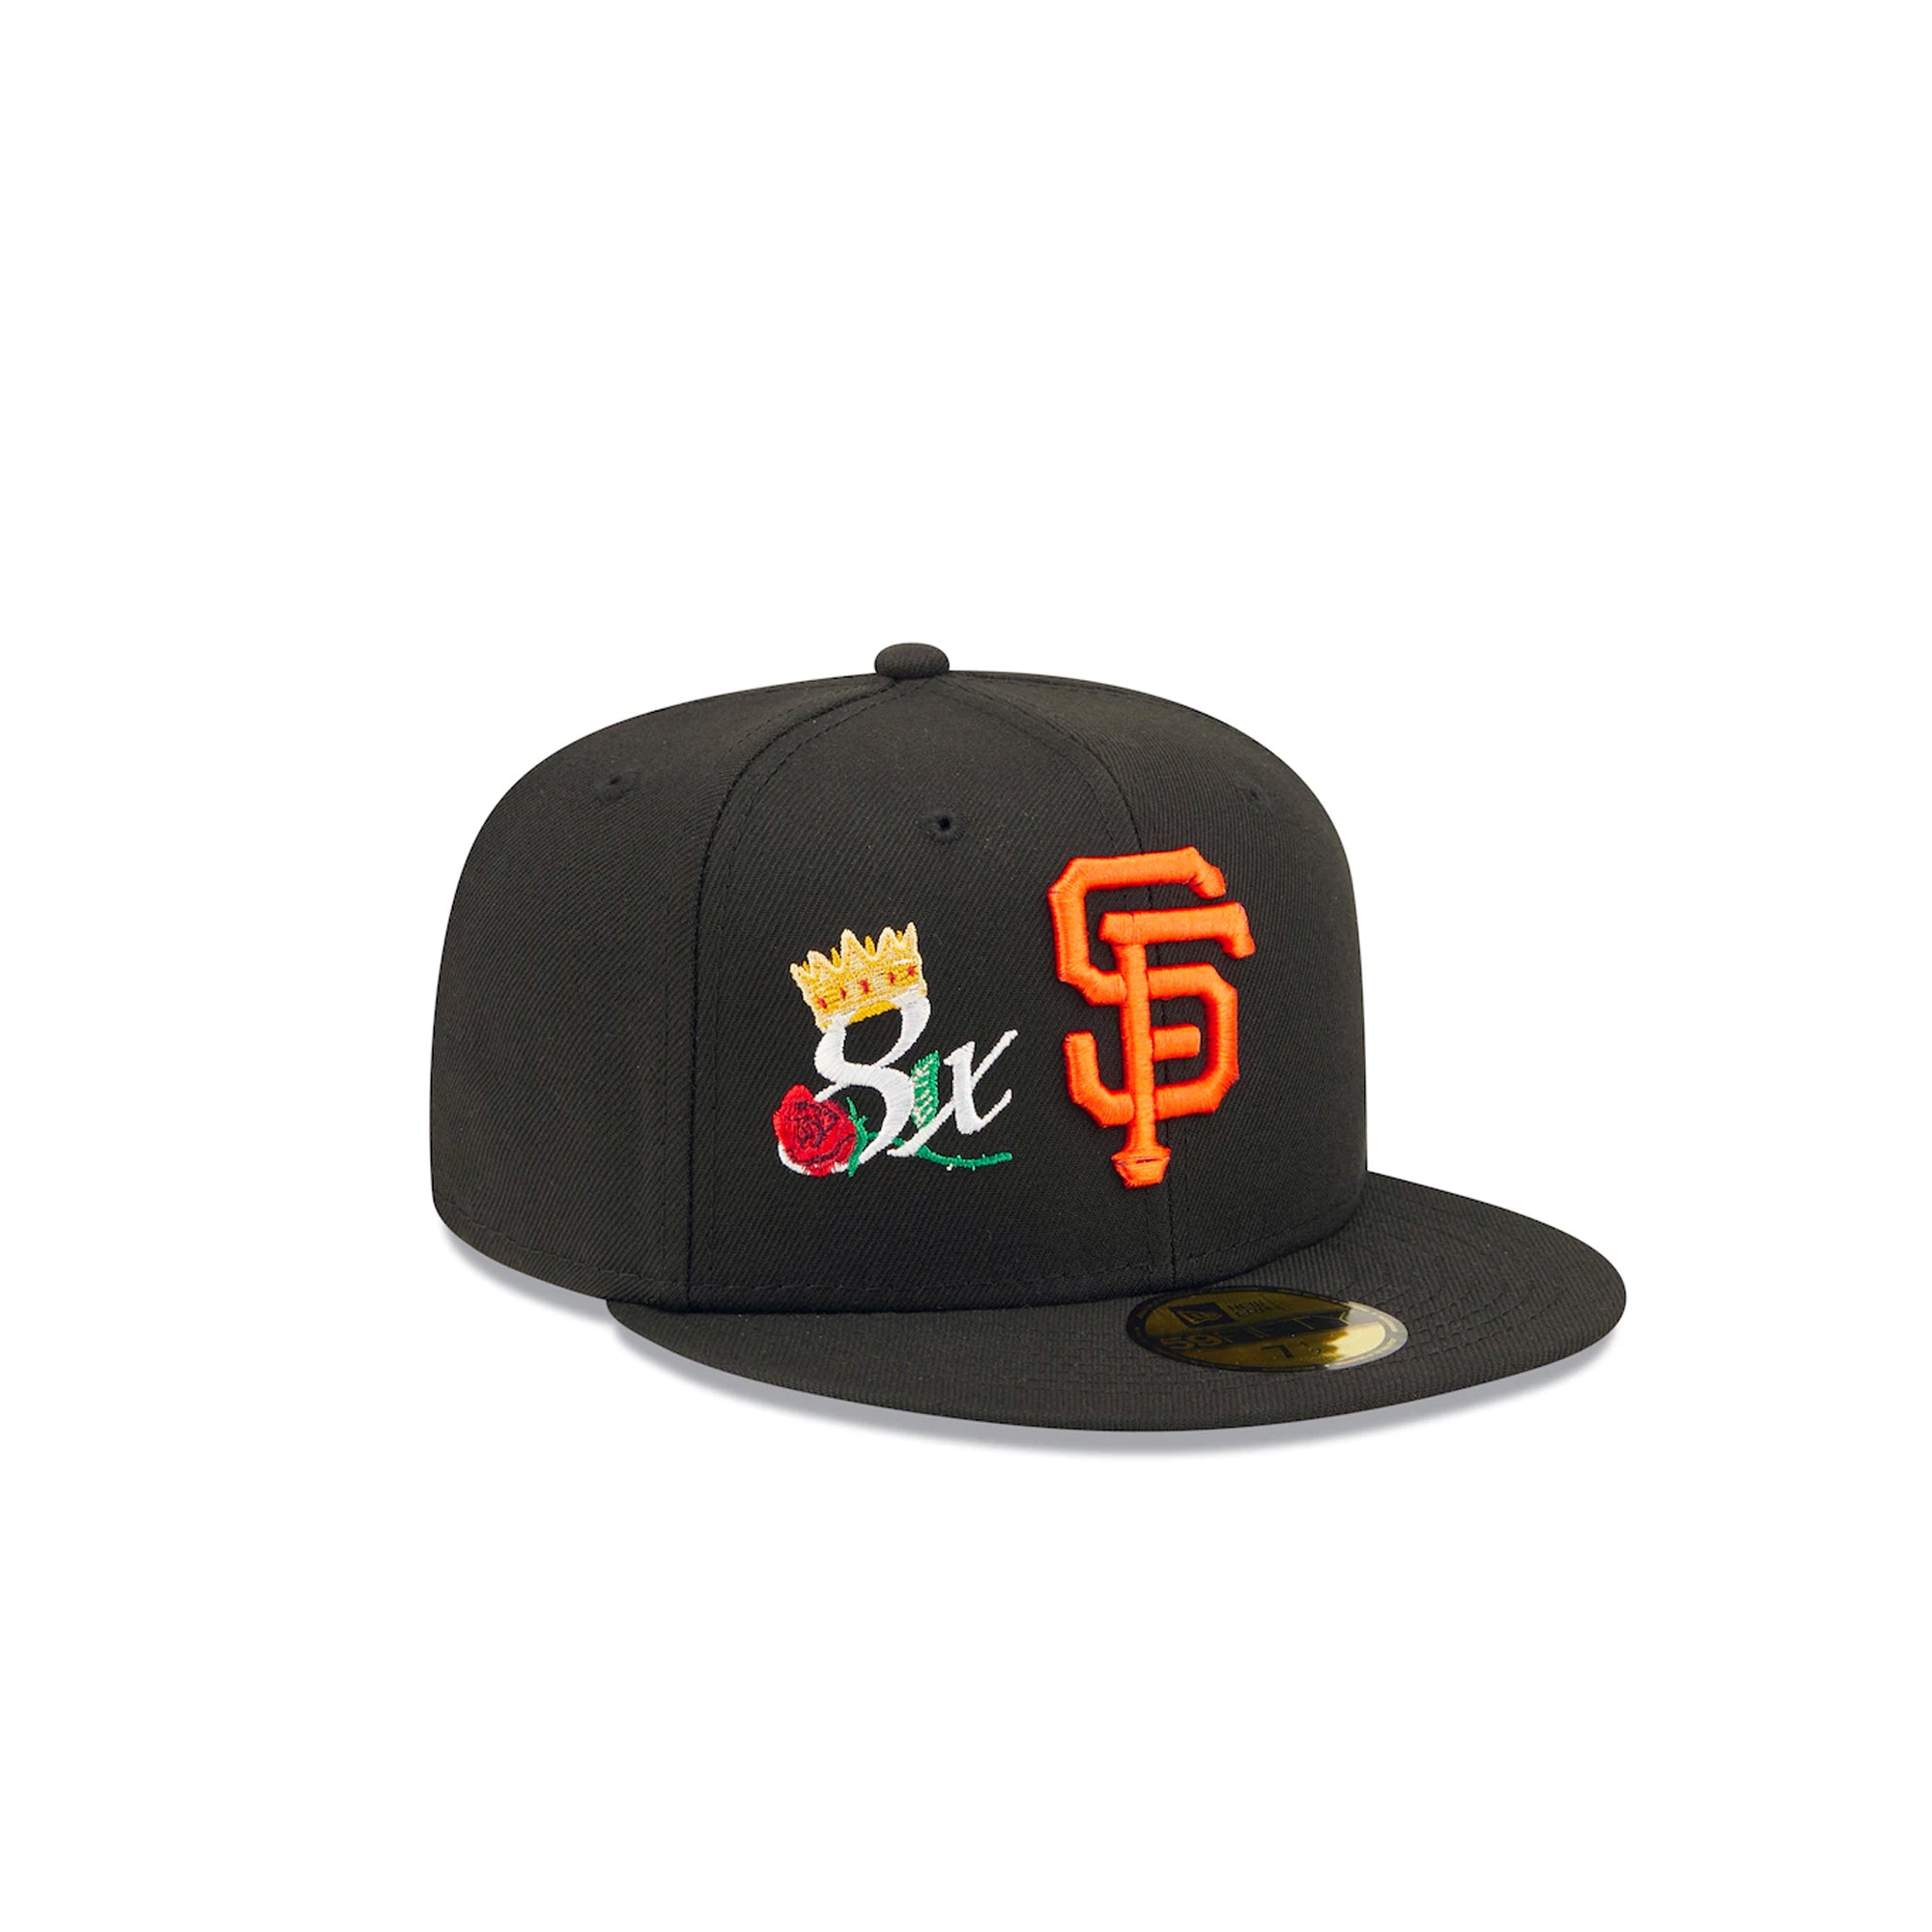 New Era Men's San Francisco Giants Black 59Fifty Retro Fitted Hat